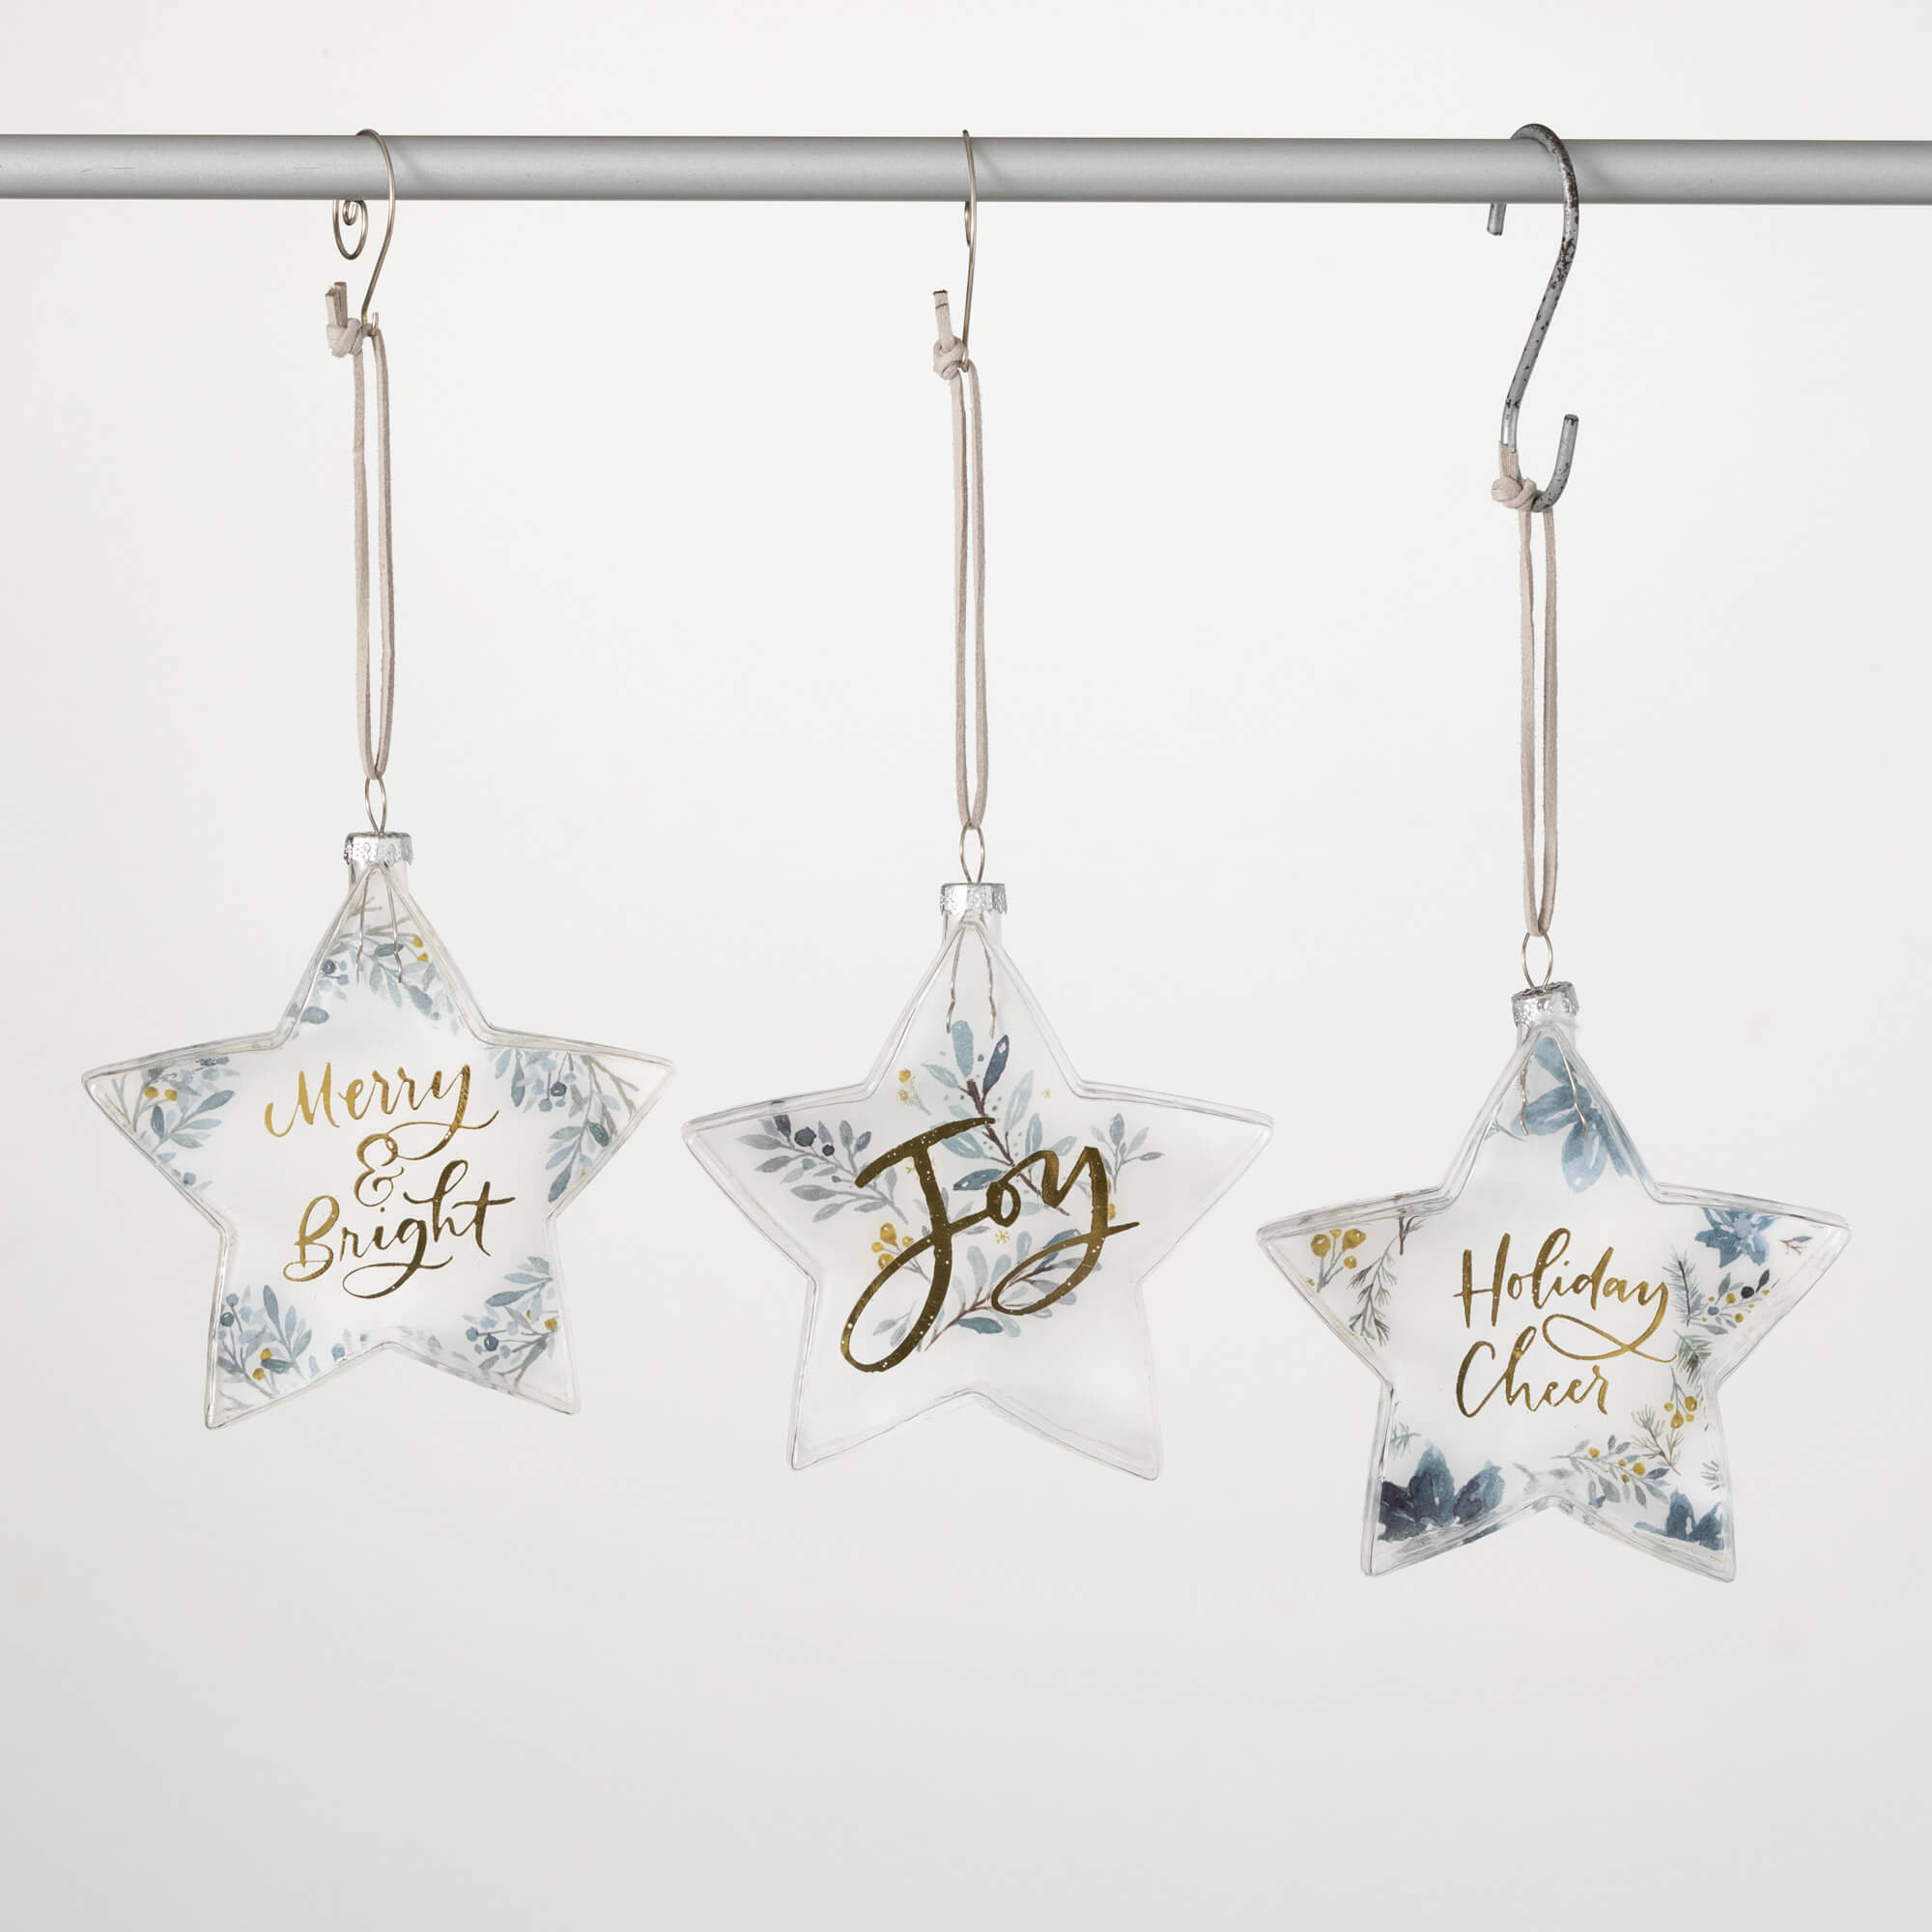 HOLIDAY WISHES STAR ORNAMENTS